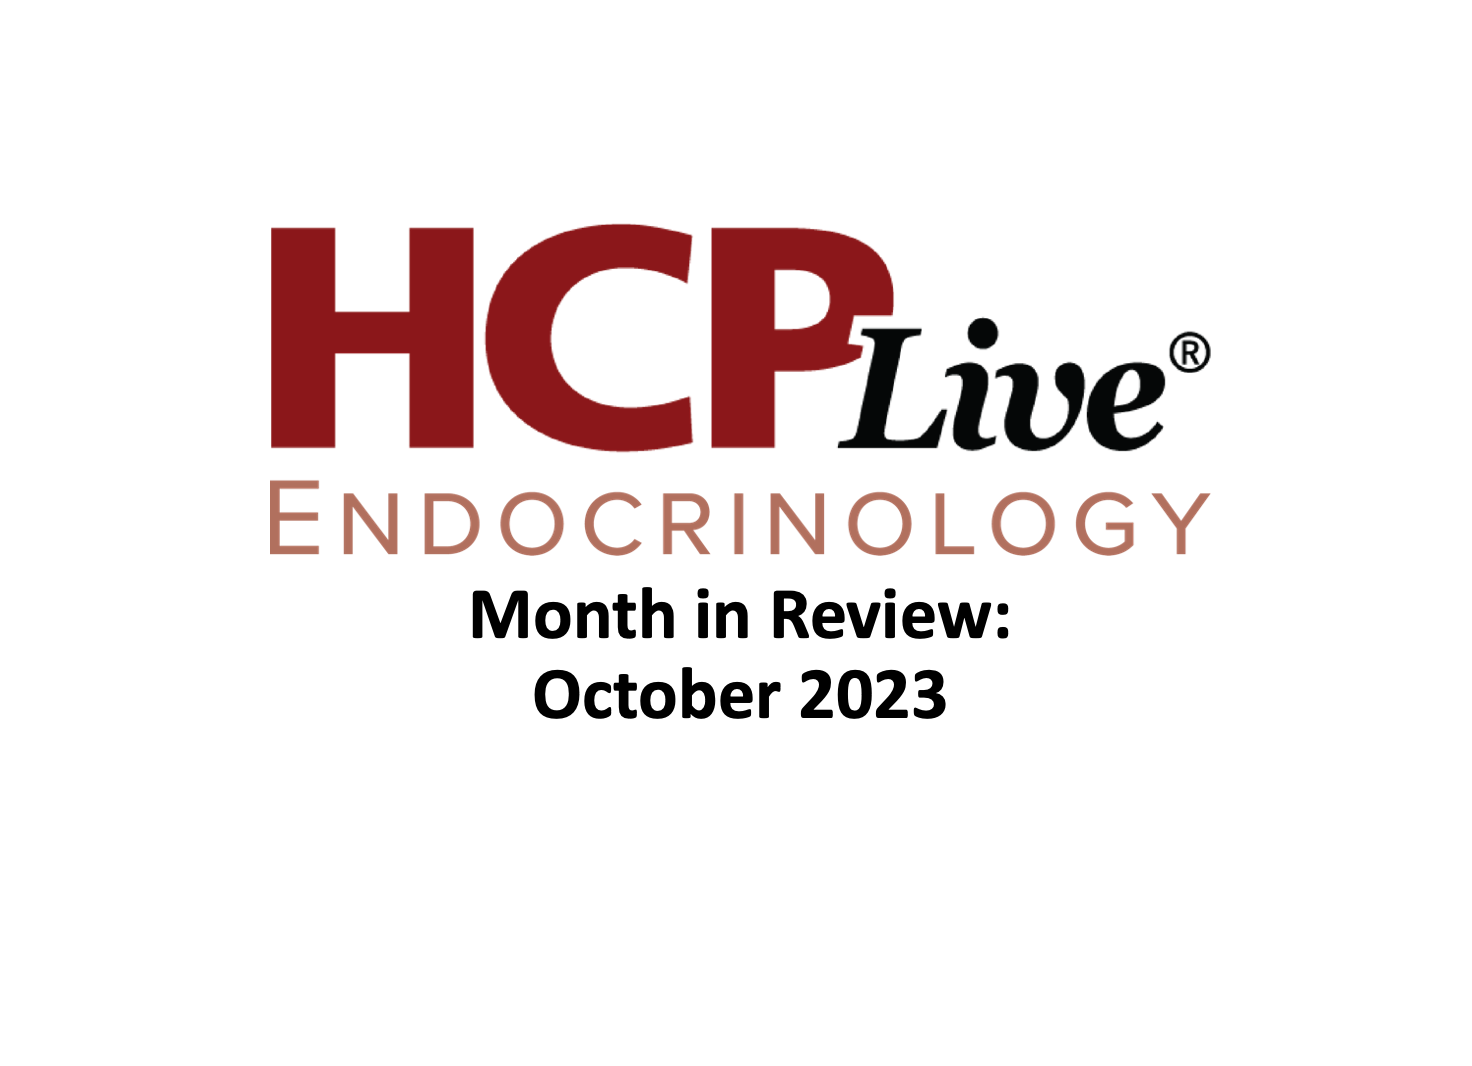 HCPLive Endocrinology Month in Review: October 2023 logo